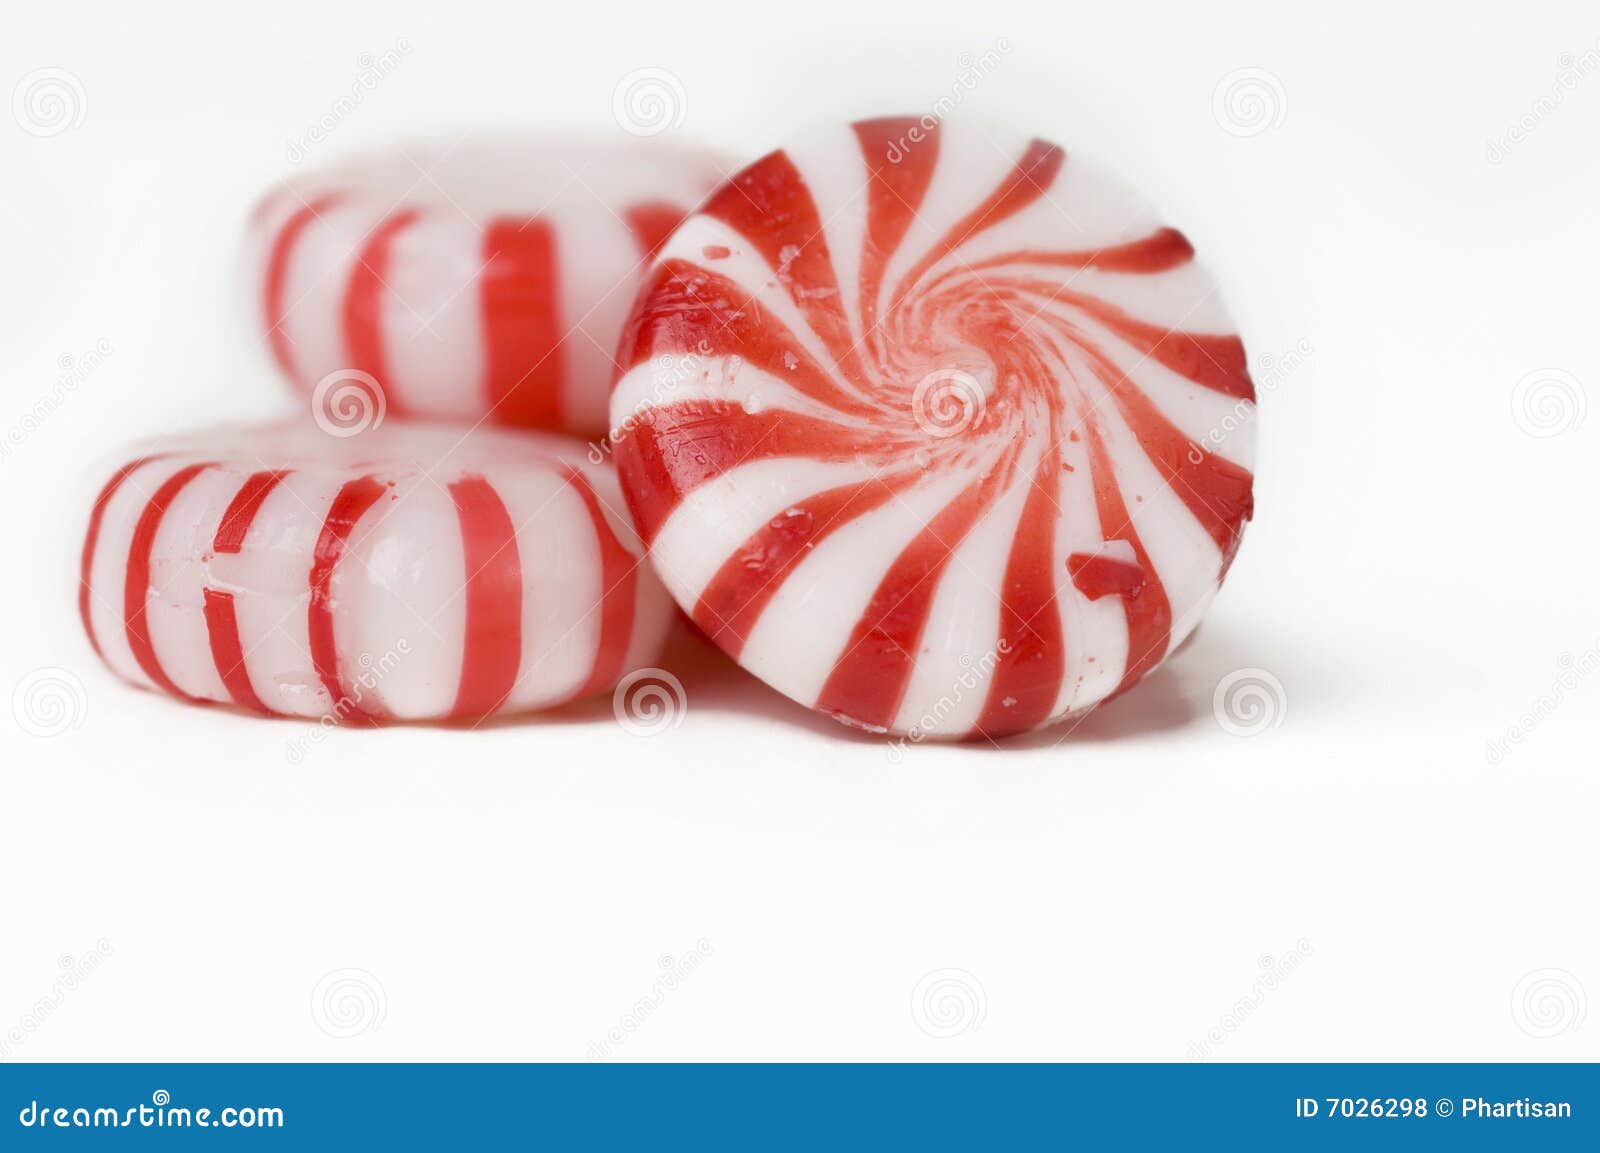 red and white mint hard candy